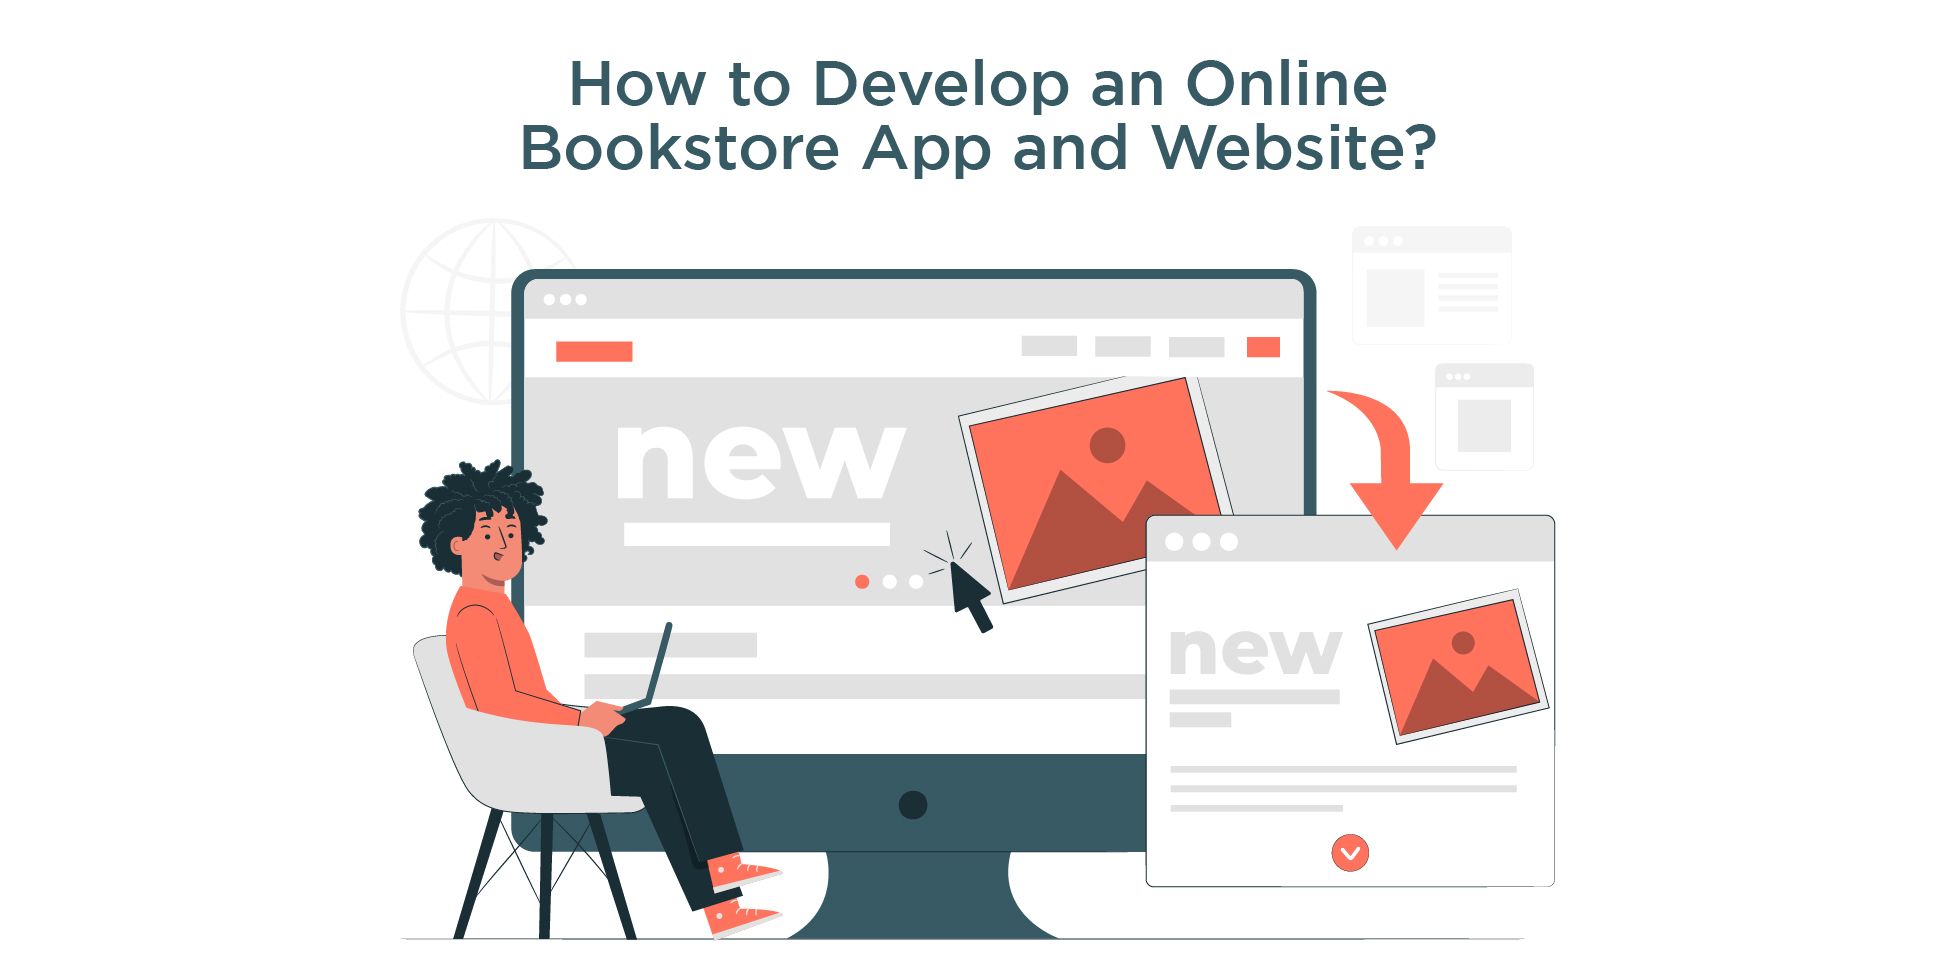 How to Develop an Online Bookstore App and Website?